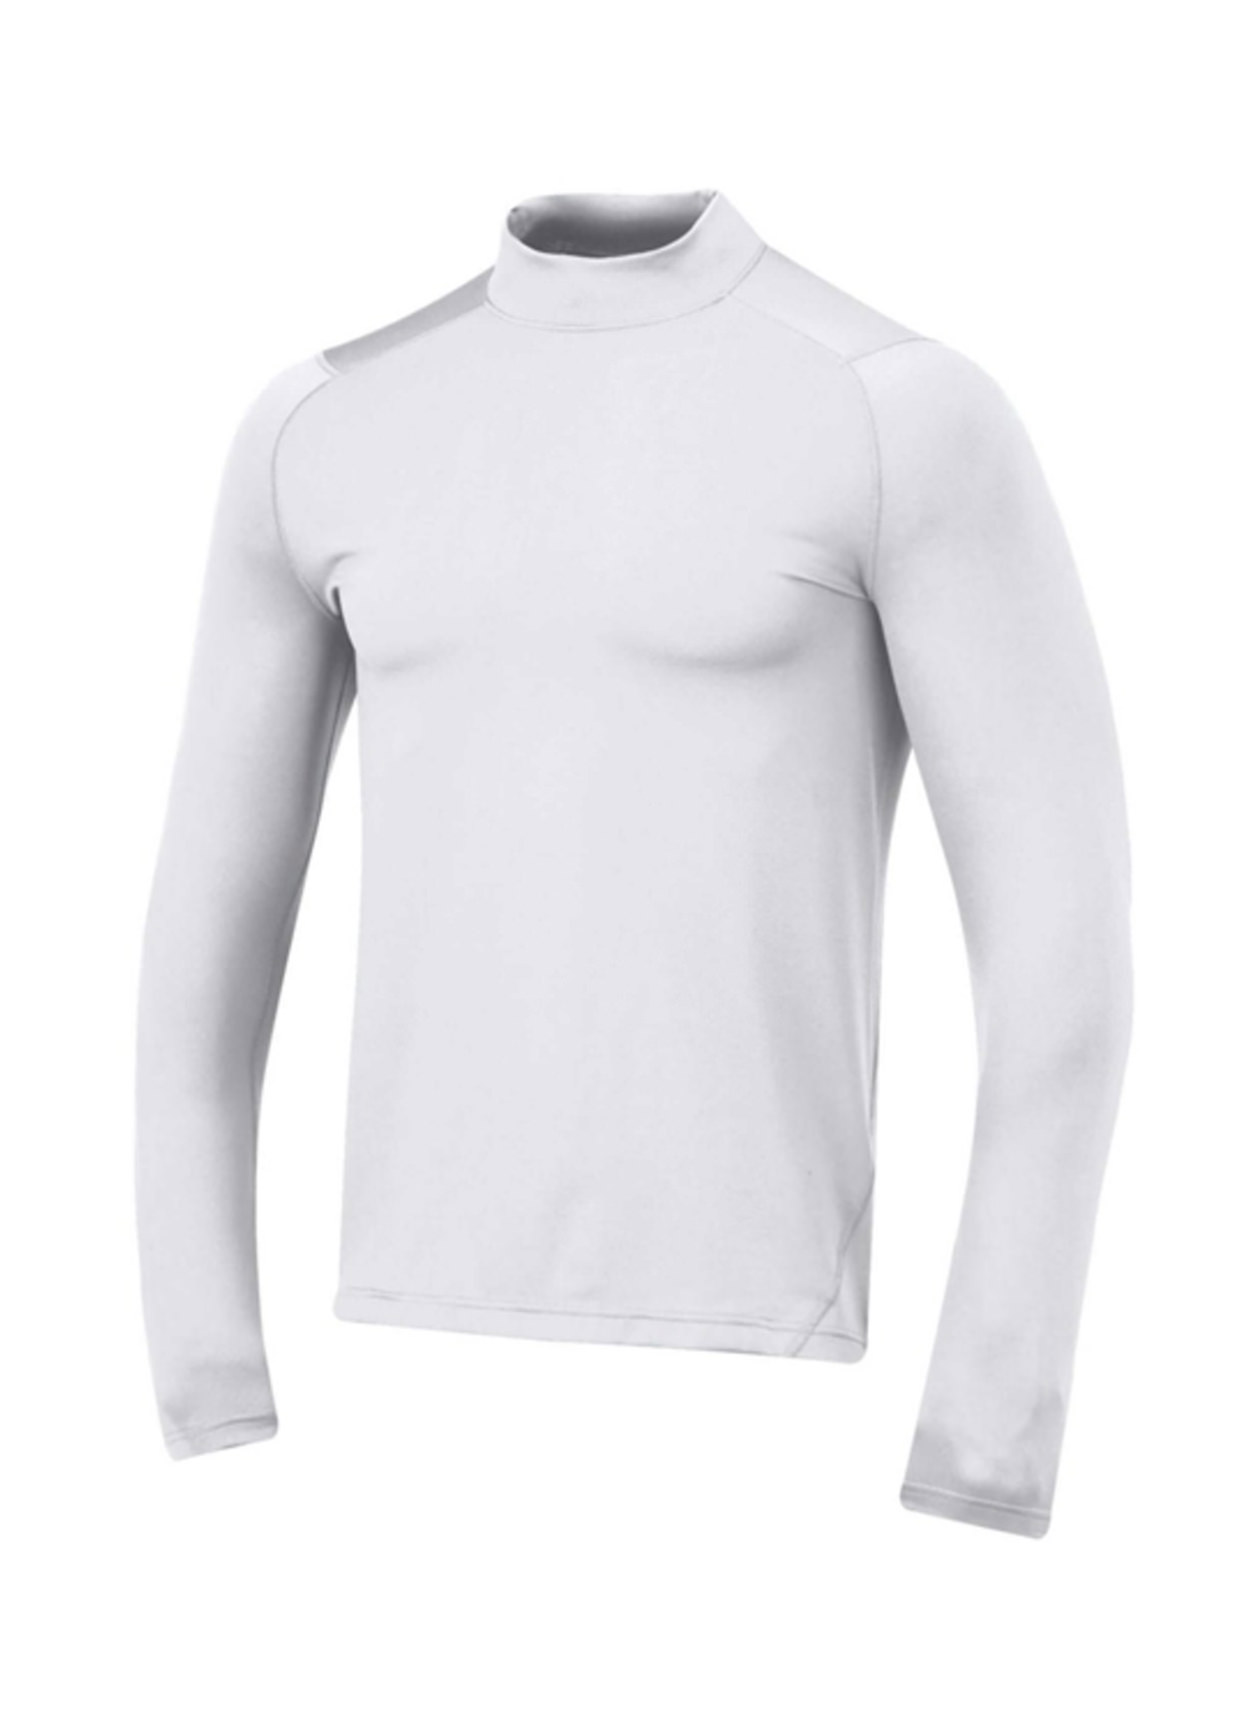 Under Armour ColdGear Infrared Long Sleeve Golf Base Layer